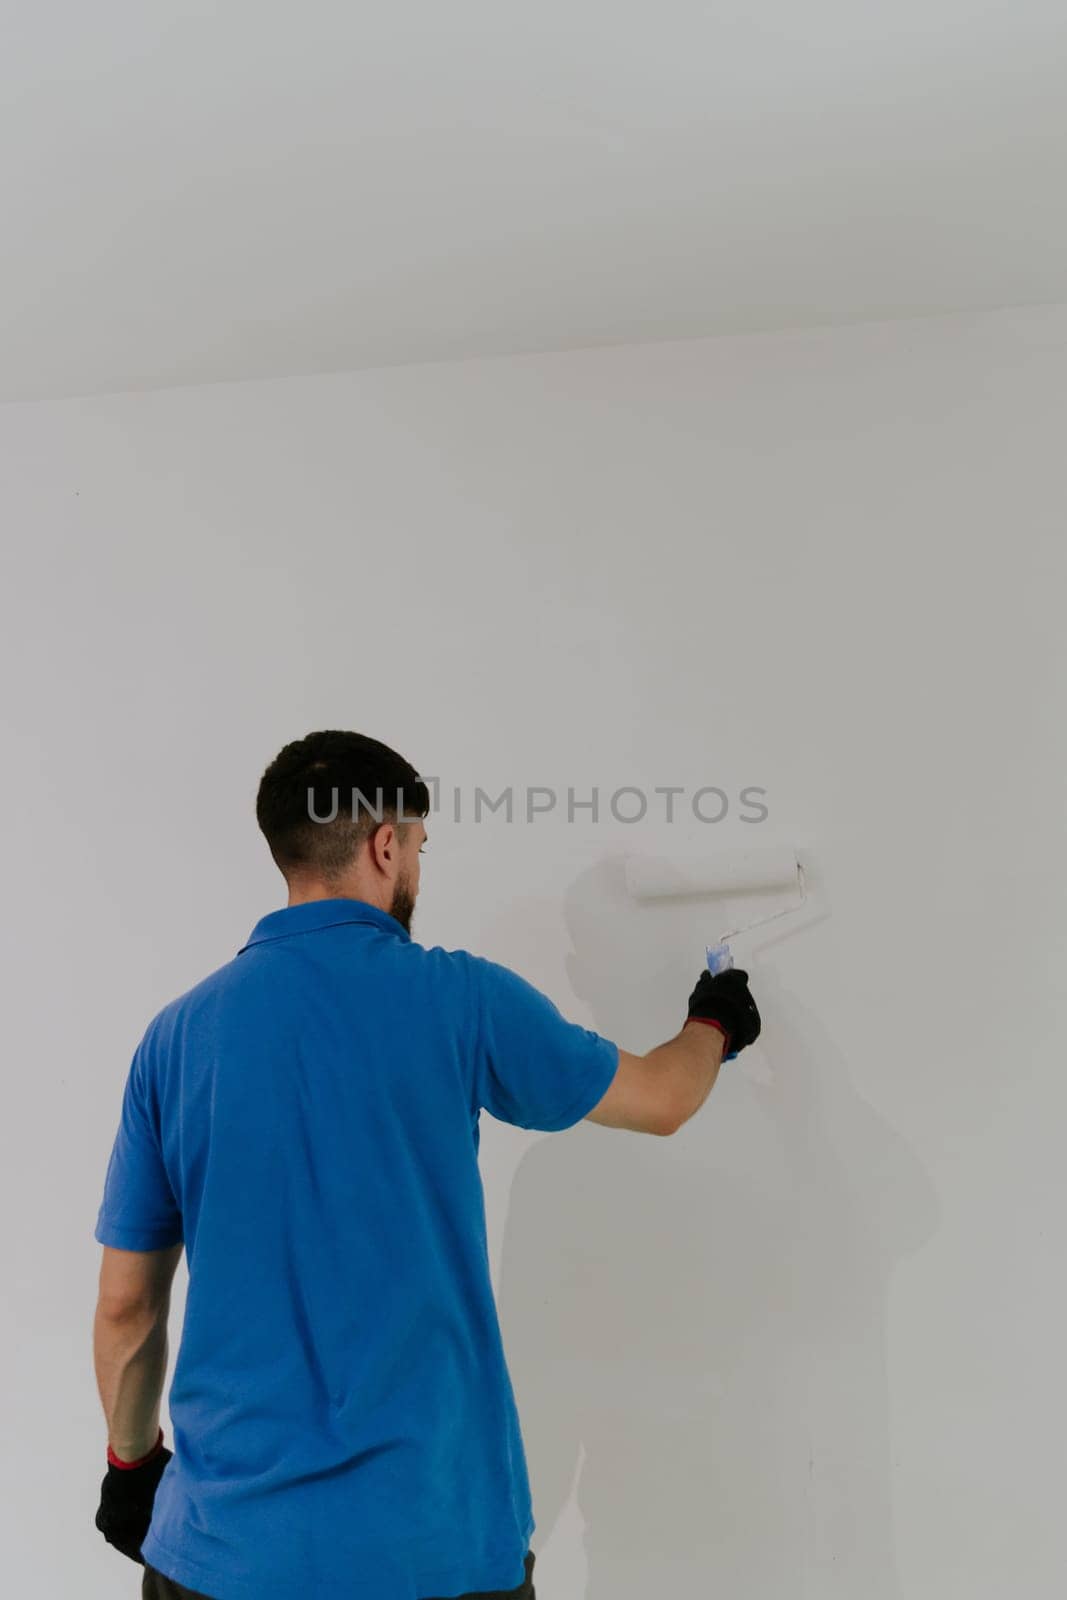 One young handsome dark-haired bearded Caucasian man in a blue t-shirt stands with his back and paints a wall with a roller of white paint, bottom side close-up view with selective focus and copy space.